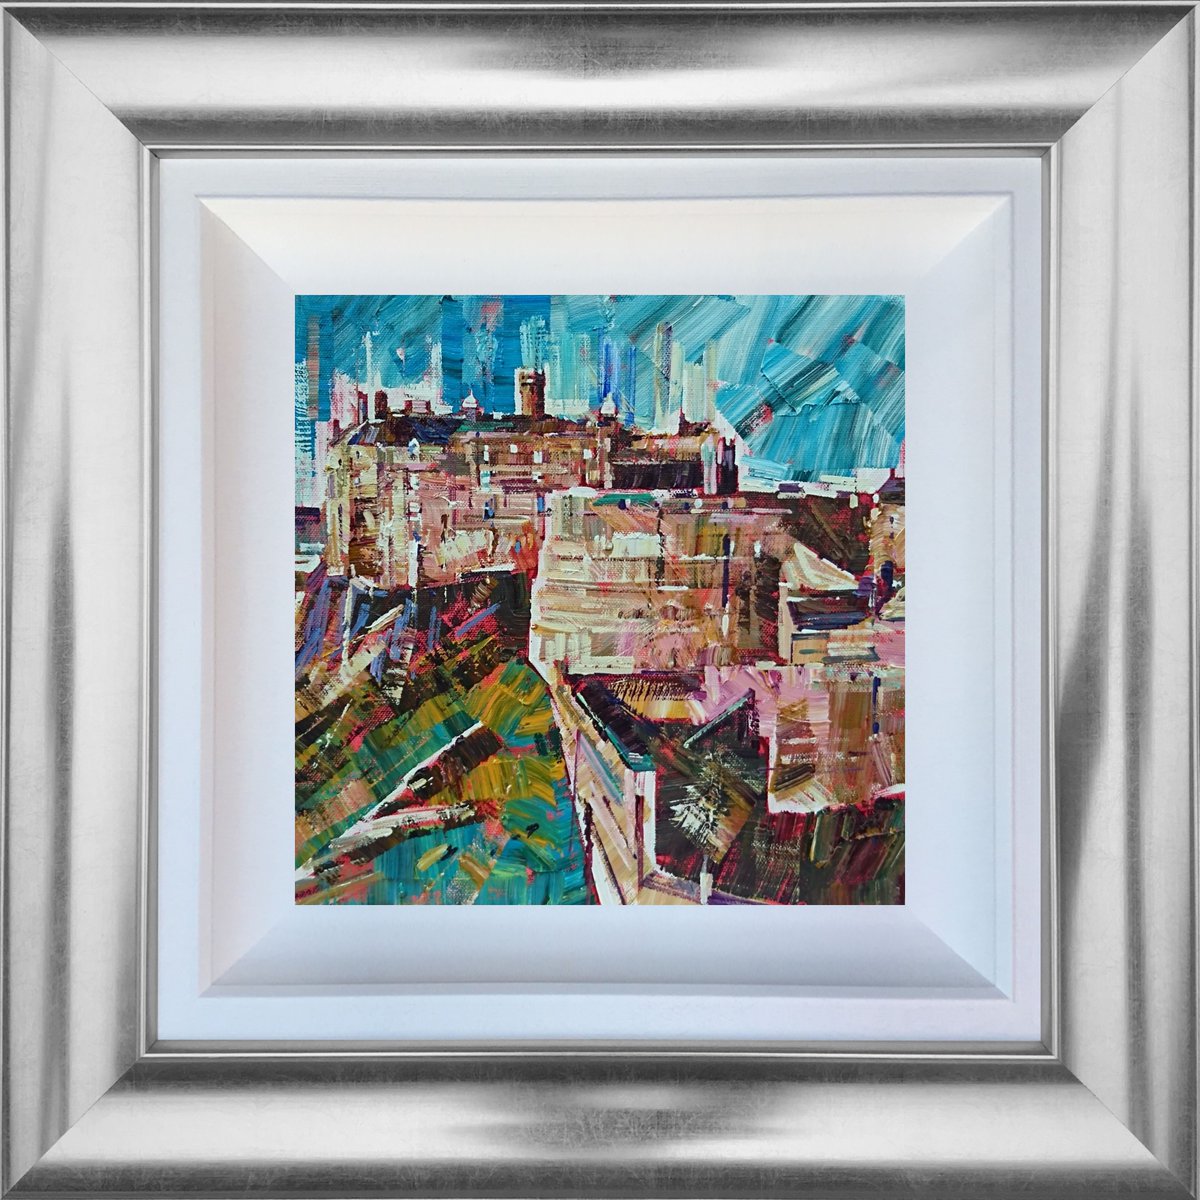 Colin Brown's new small format cityscapes make perfect gifts... or a treat for yourself! Each one measures just 49x49cm (including the frame) offering stunning glimpses of Edinburgh's skyline.
watsongallery.co.uk/gallery/Colin-…
#contemporaryimpressionism #artgiftideas